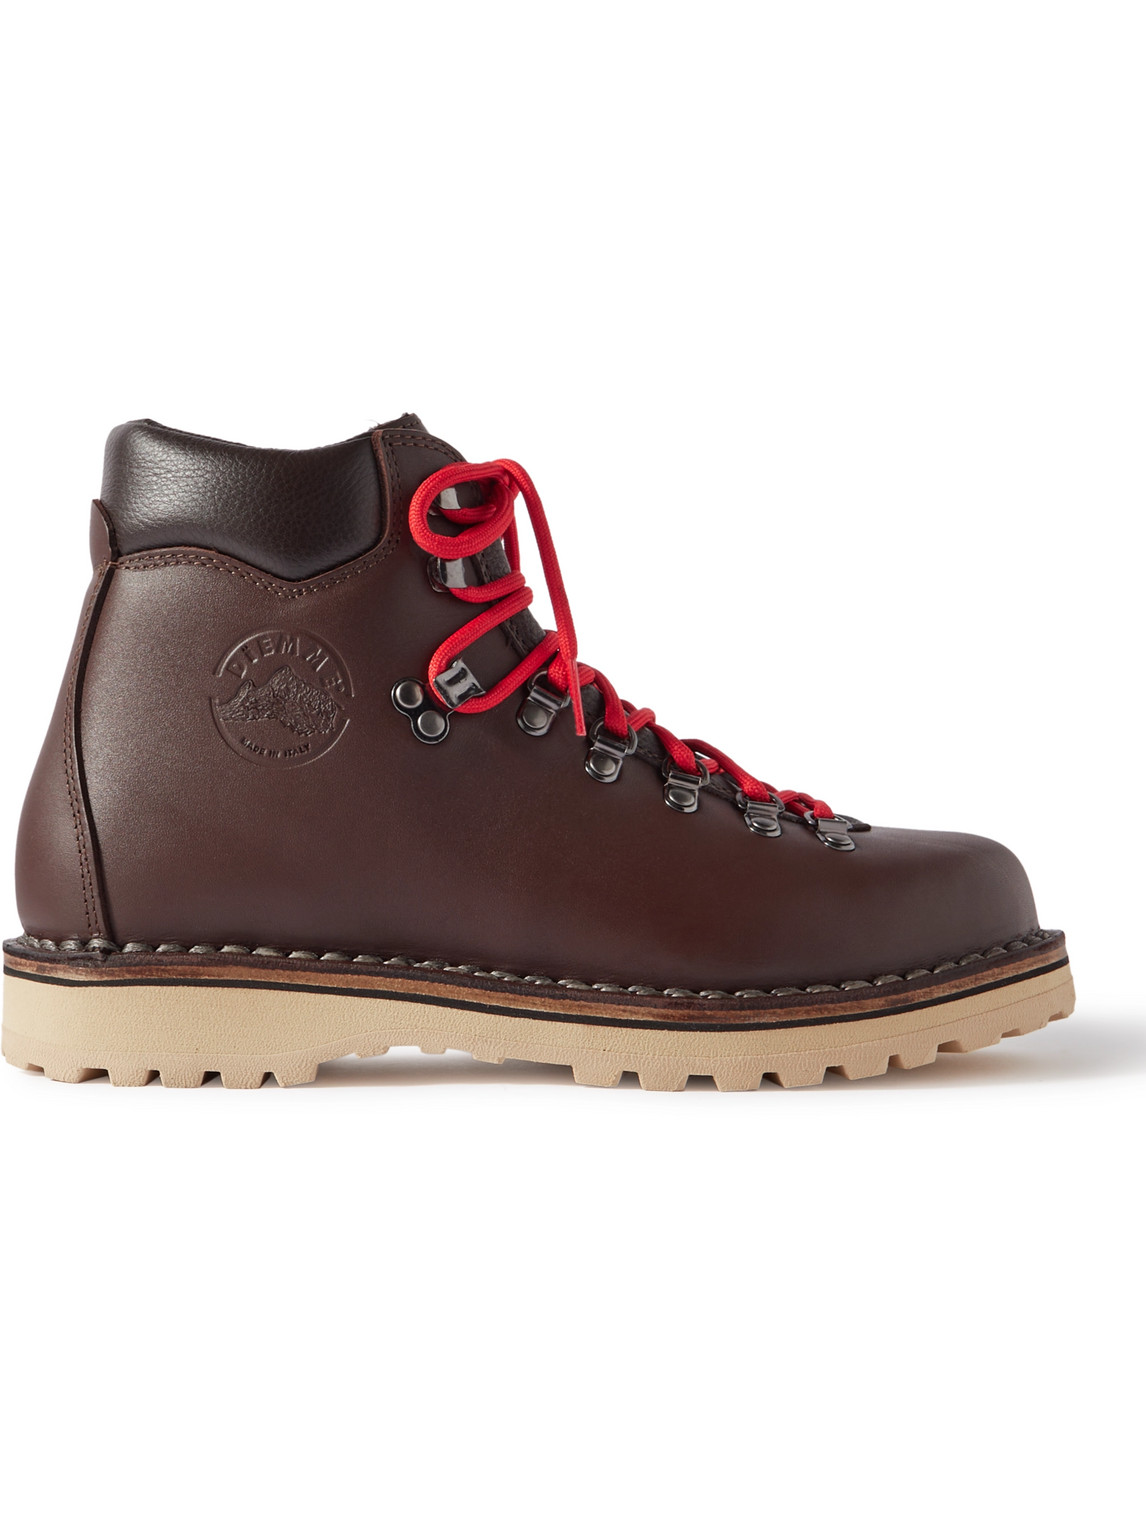 Diemme Roccia Vet Leather Hiking Boots In Brown